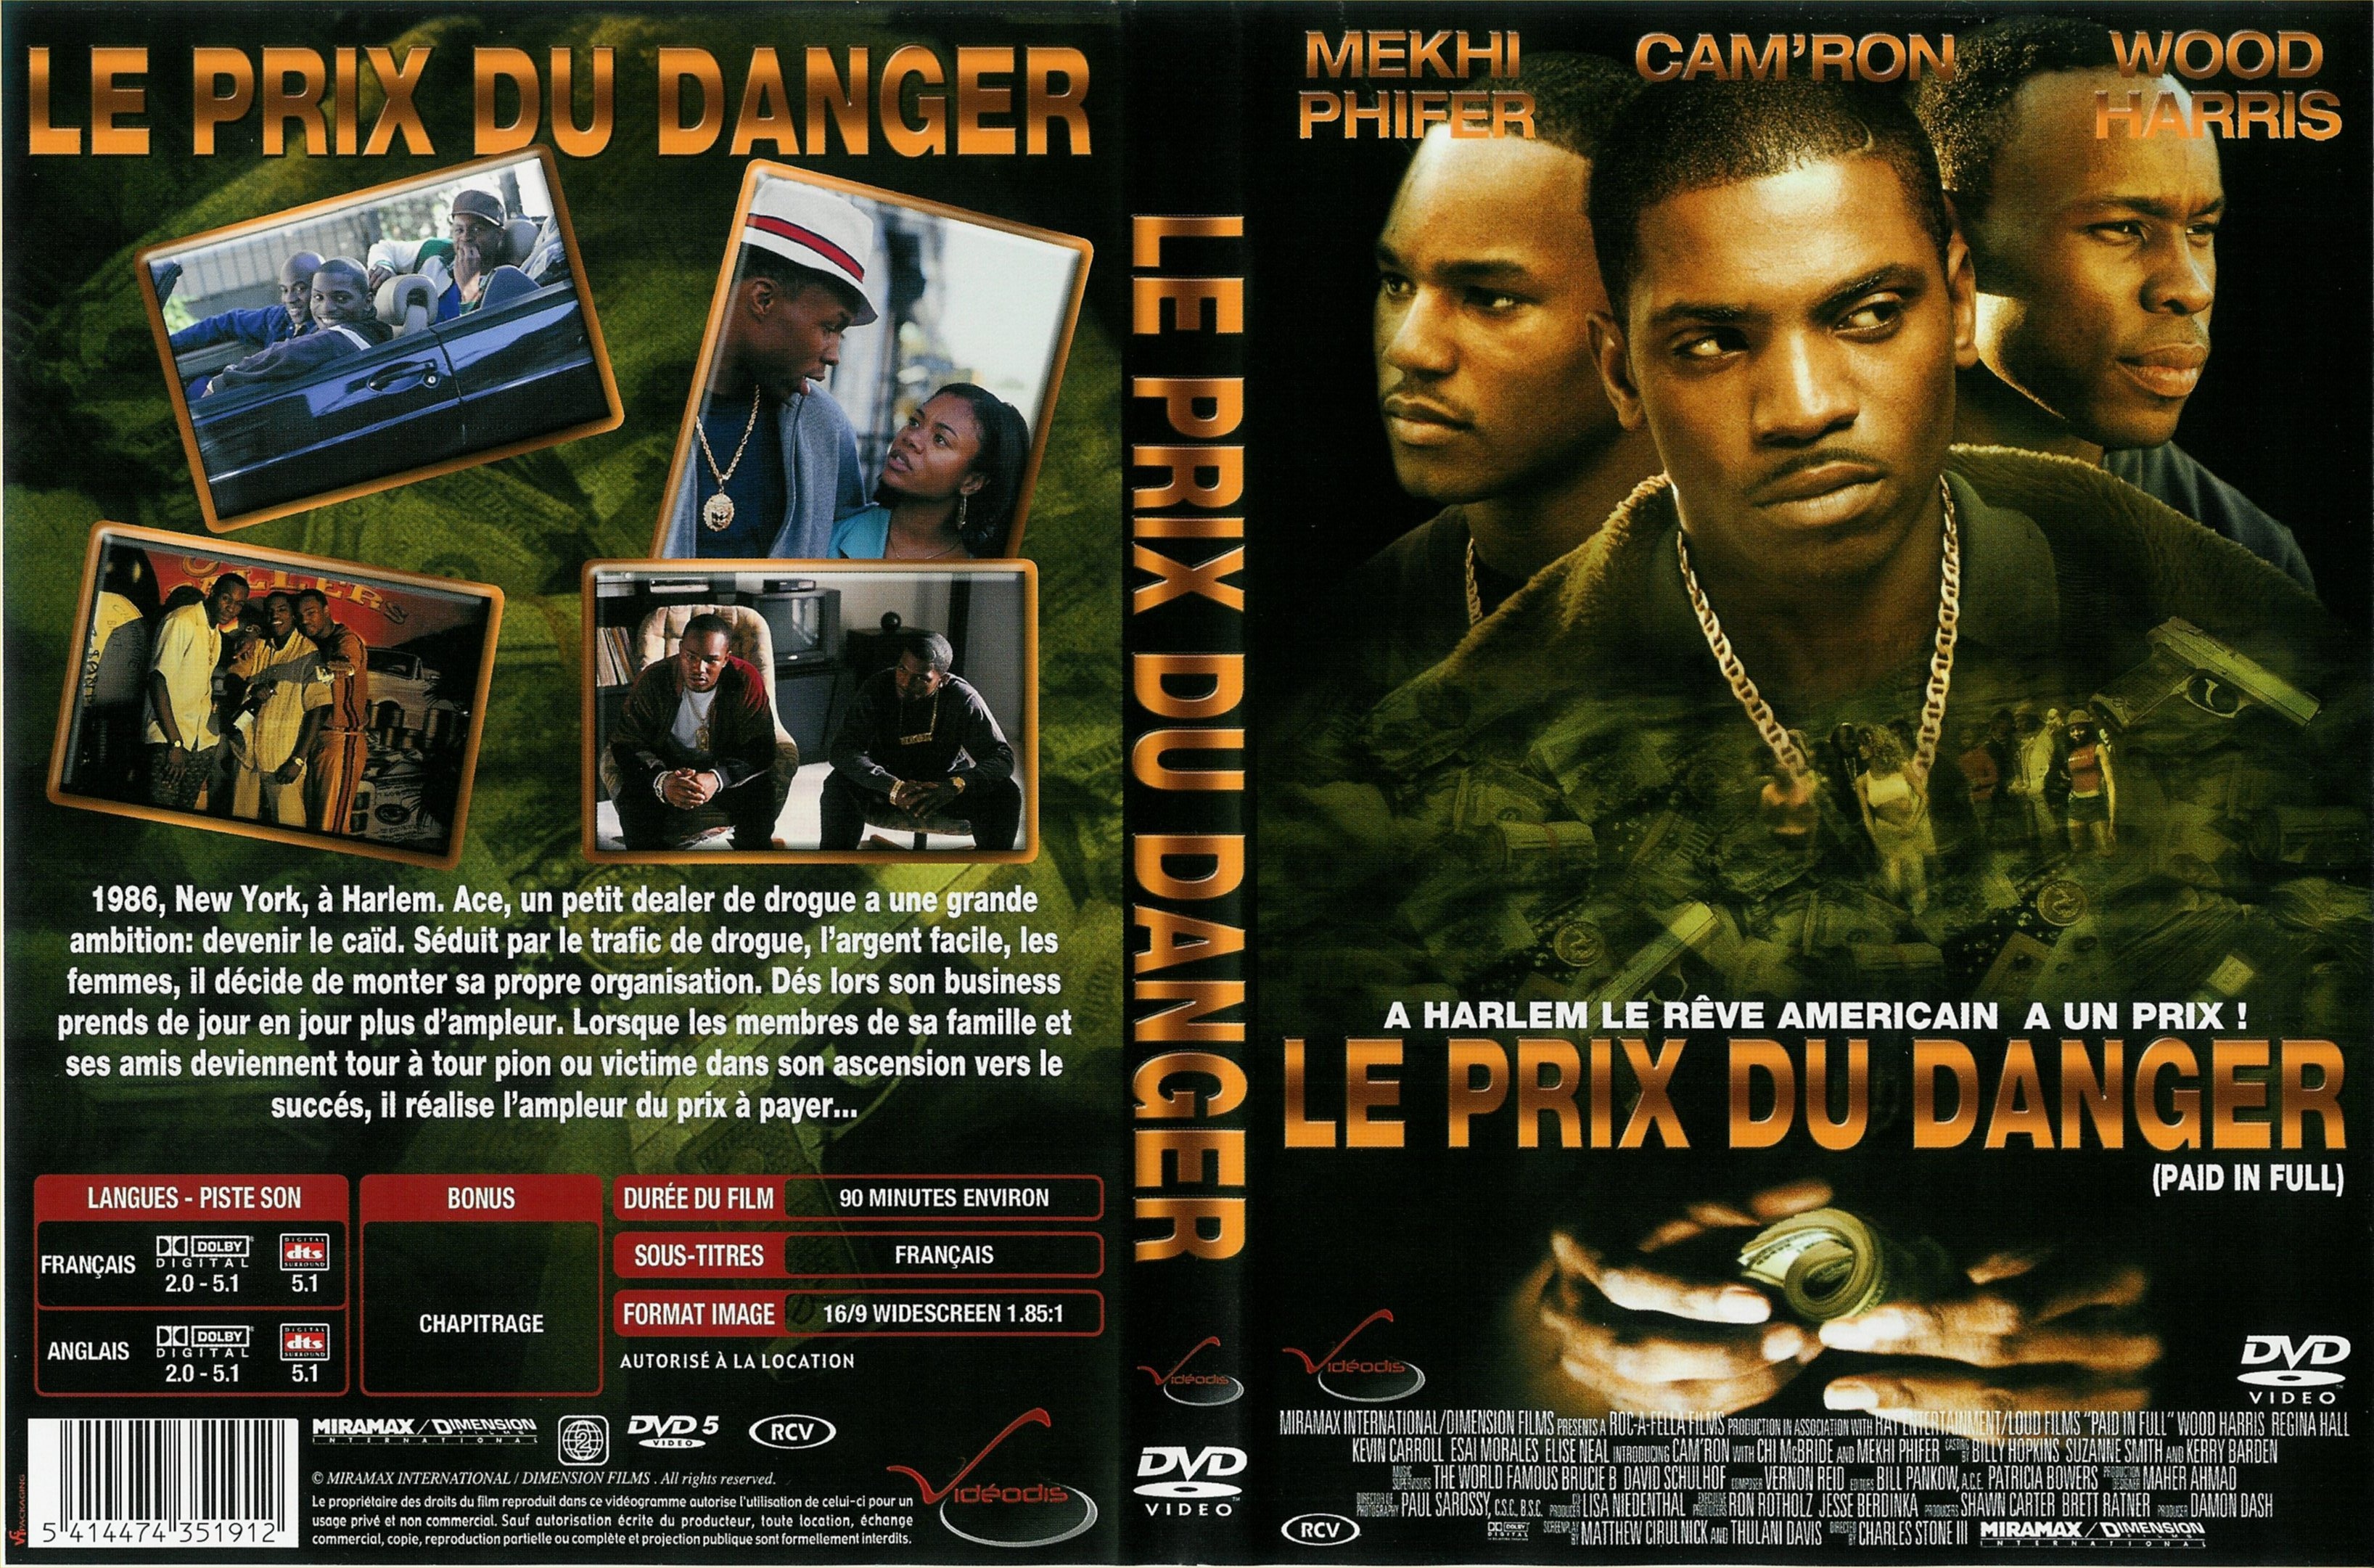 Jaquette DVD Paid in full